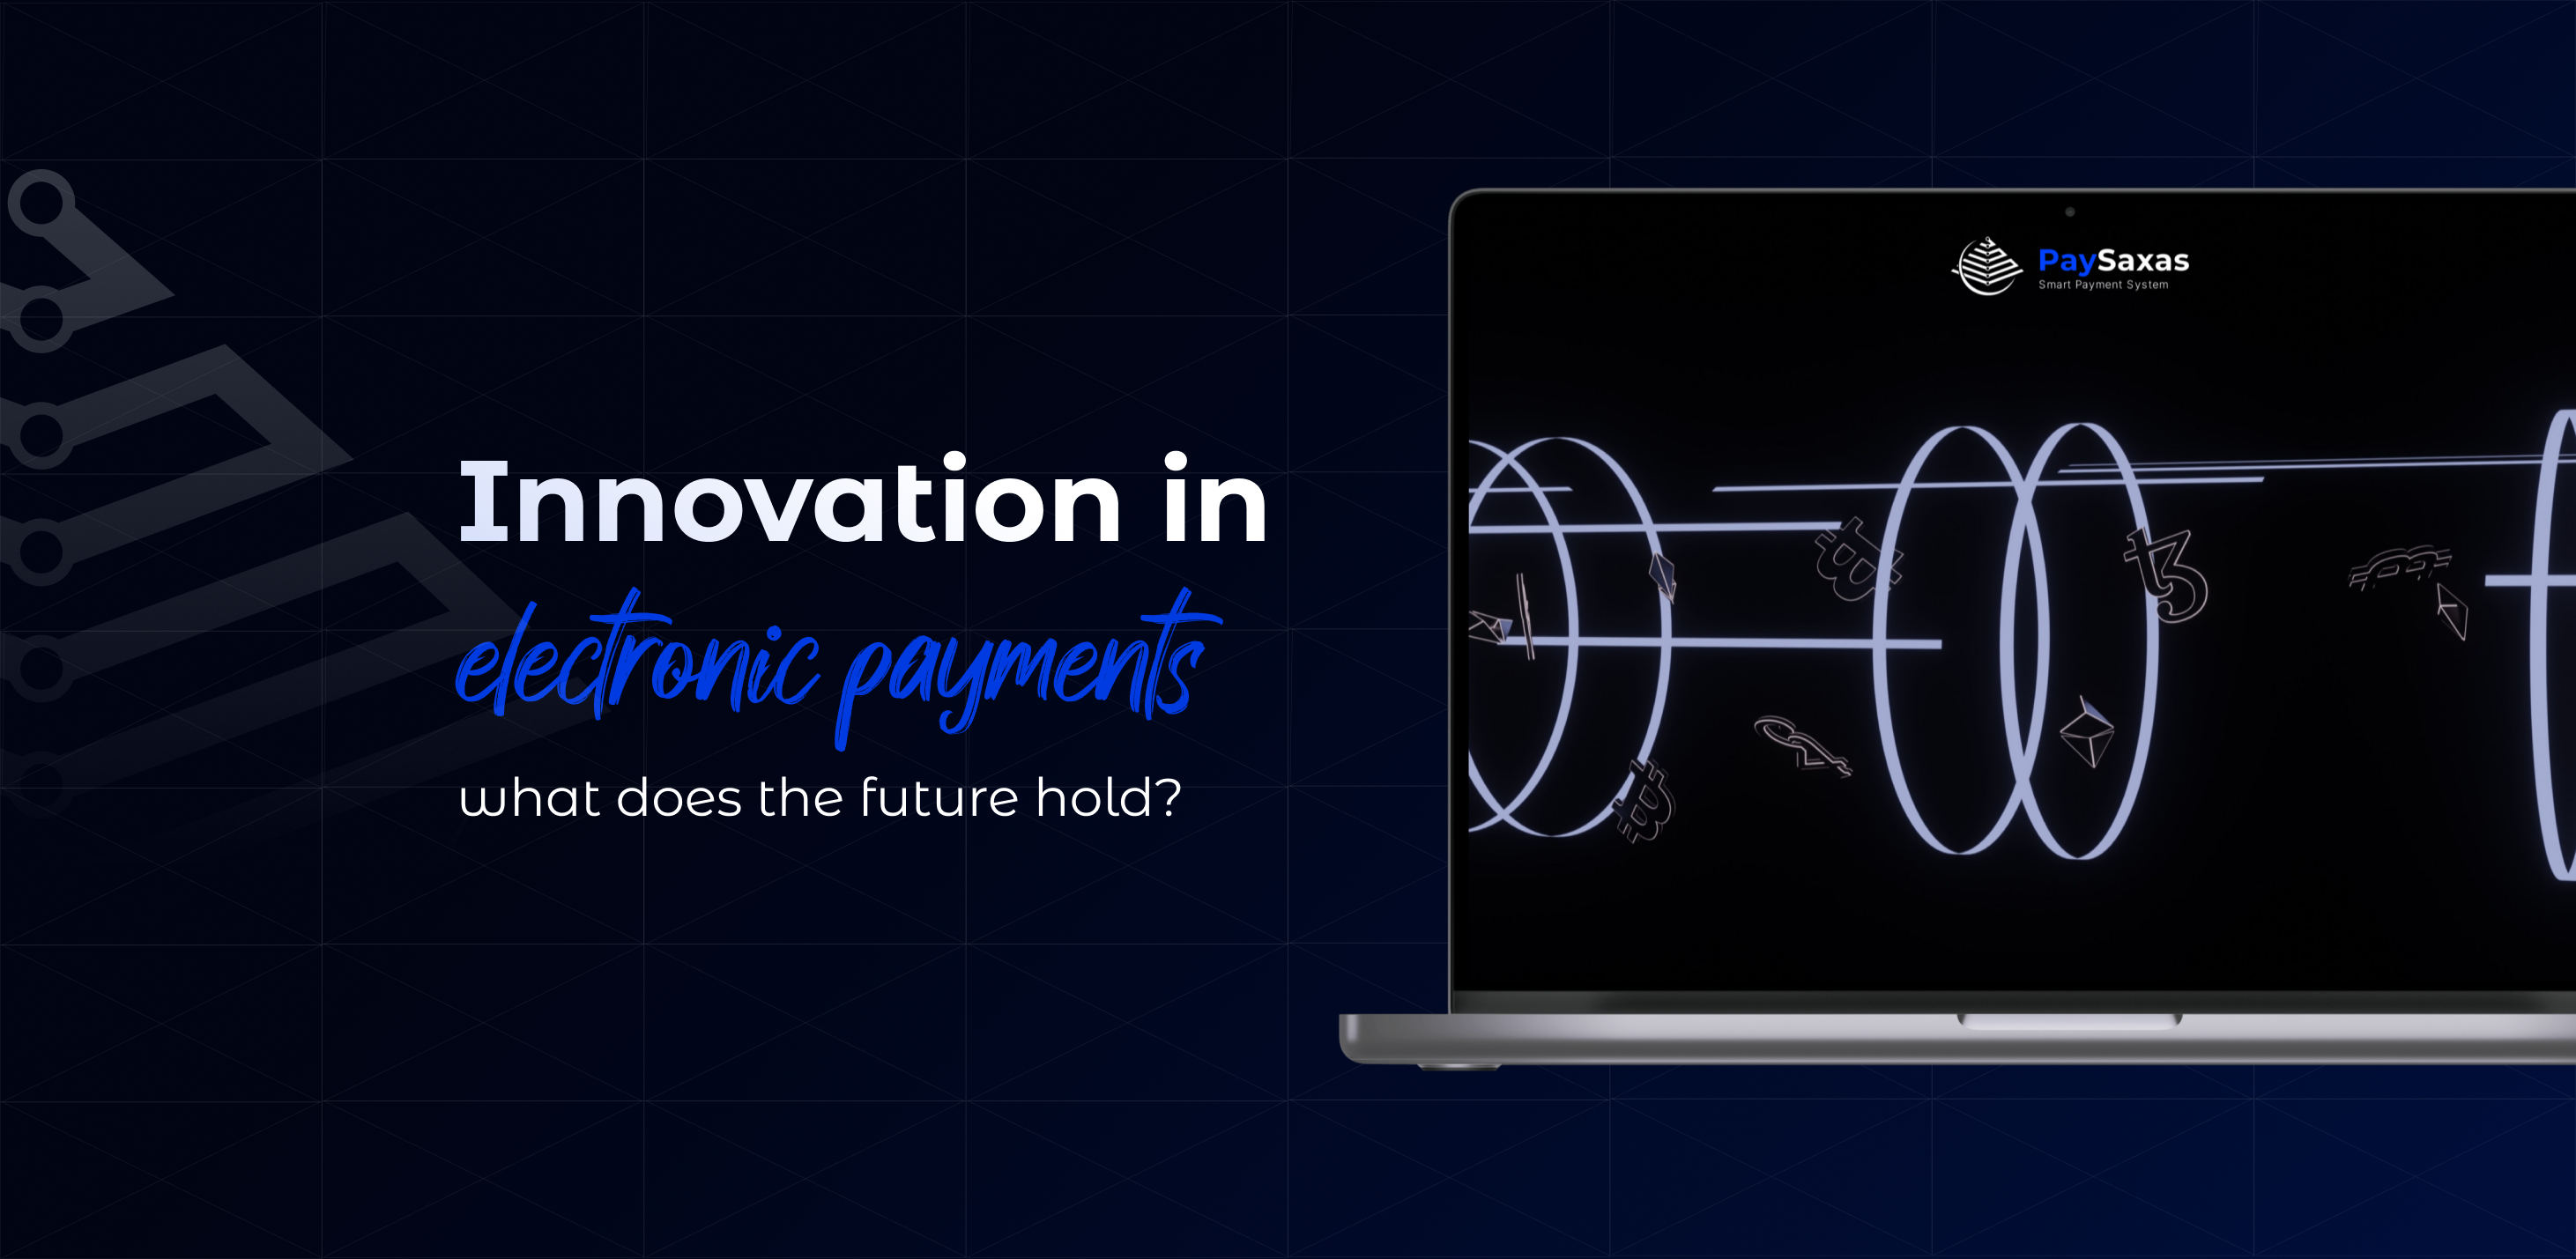 Innovations in electronic payments: what does the future hold for business?